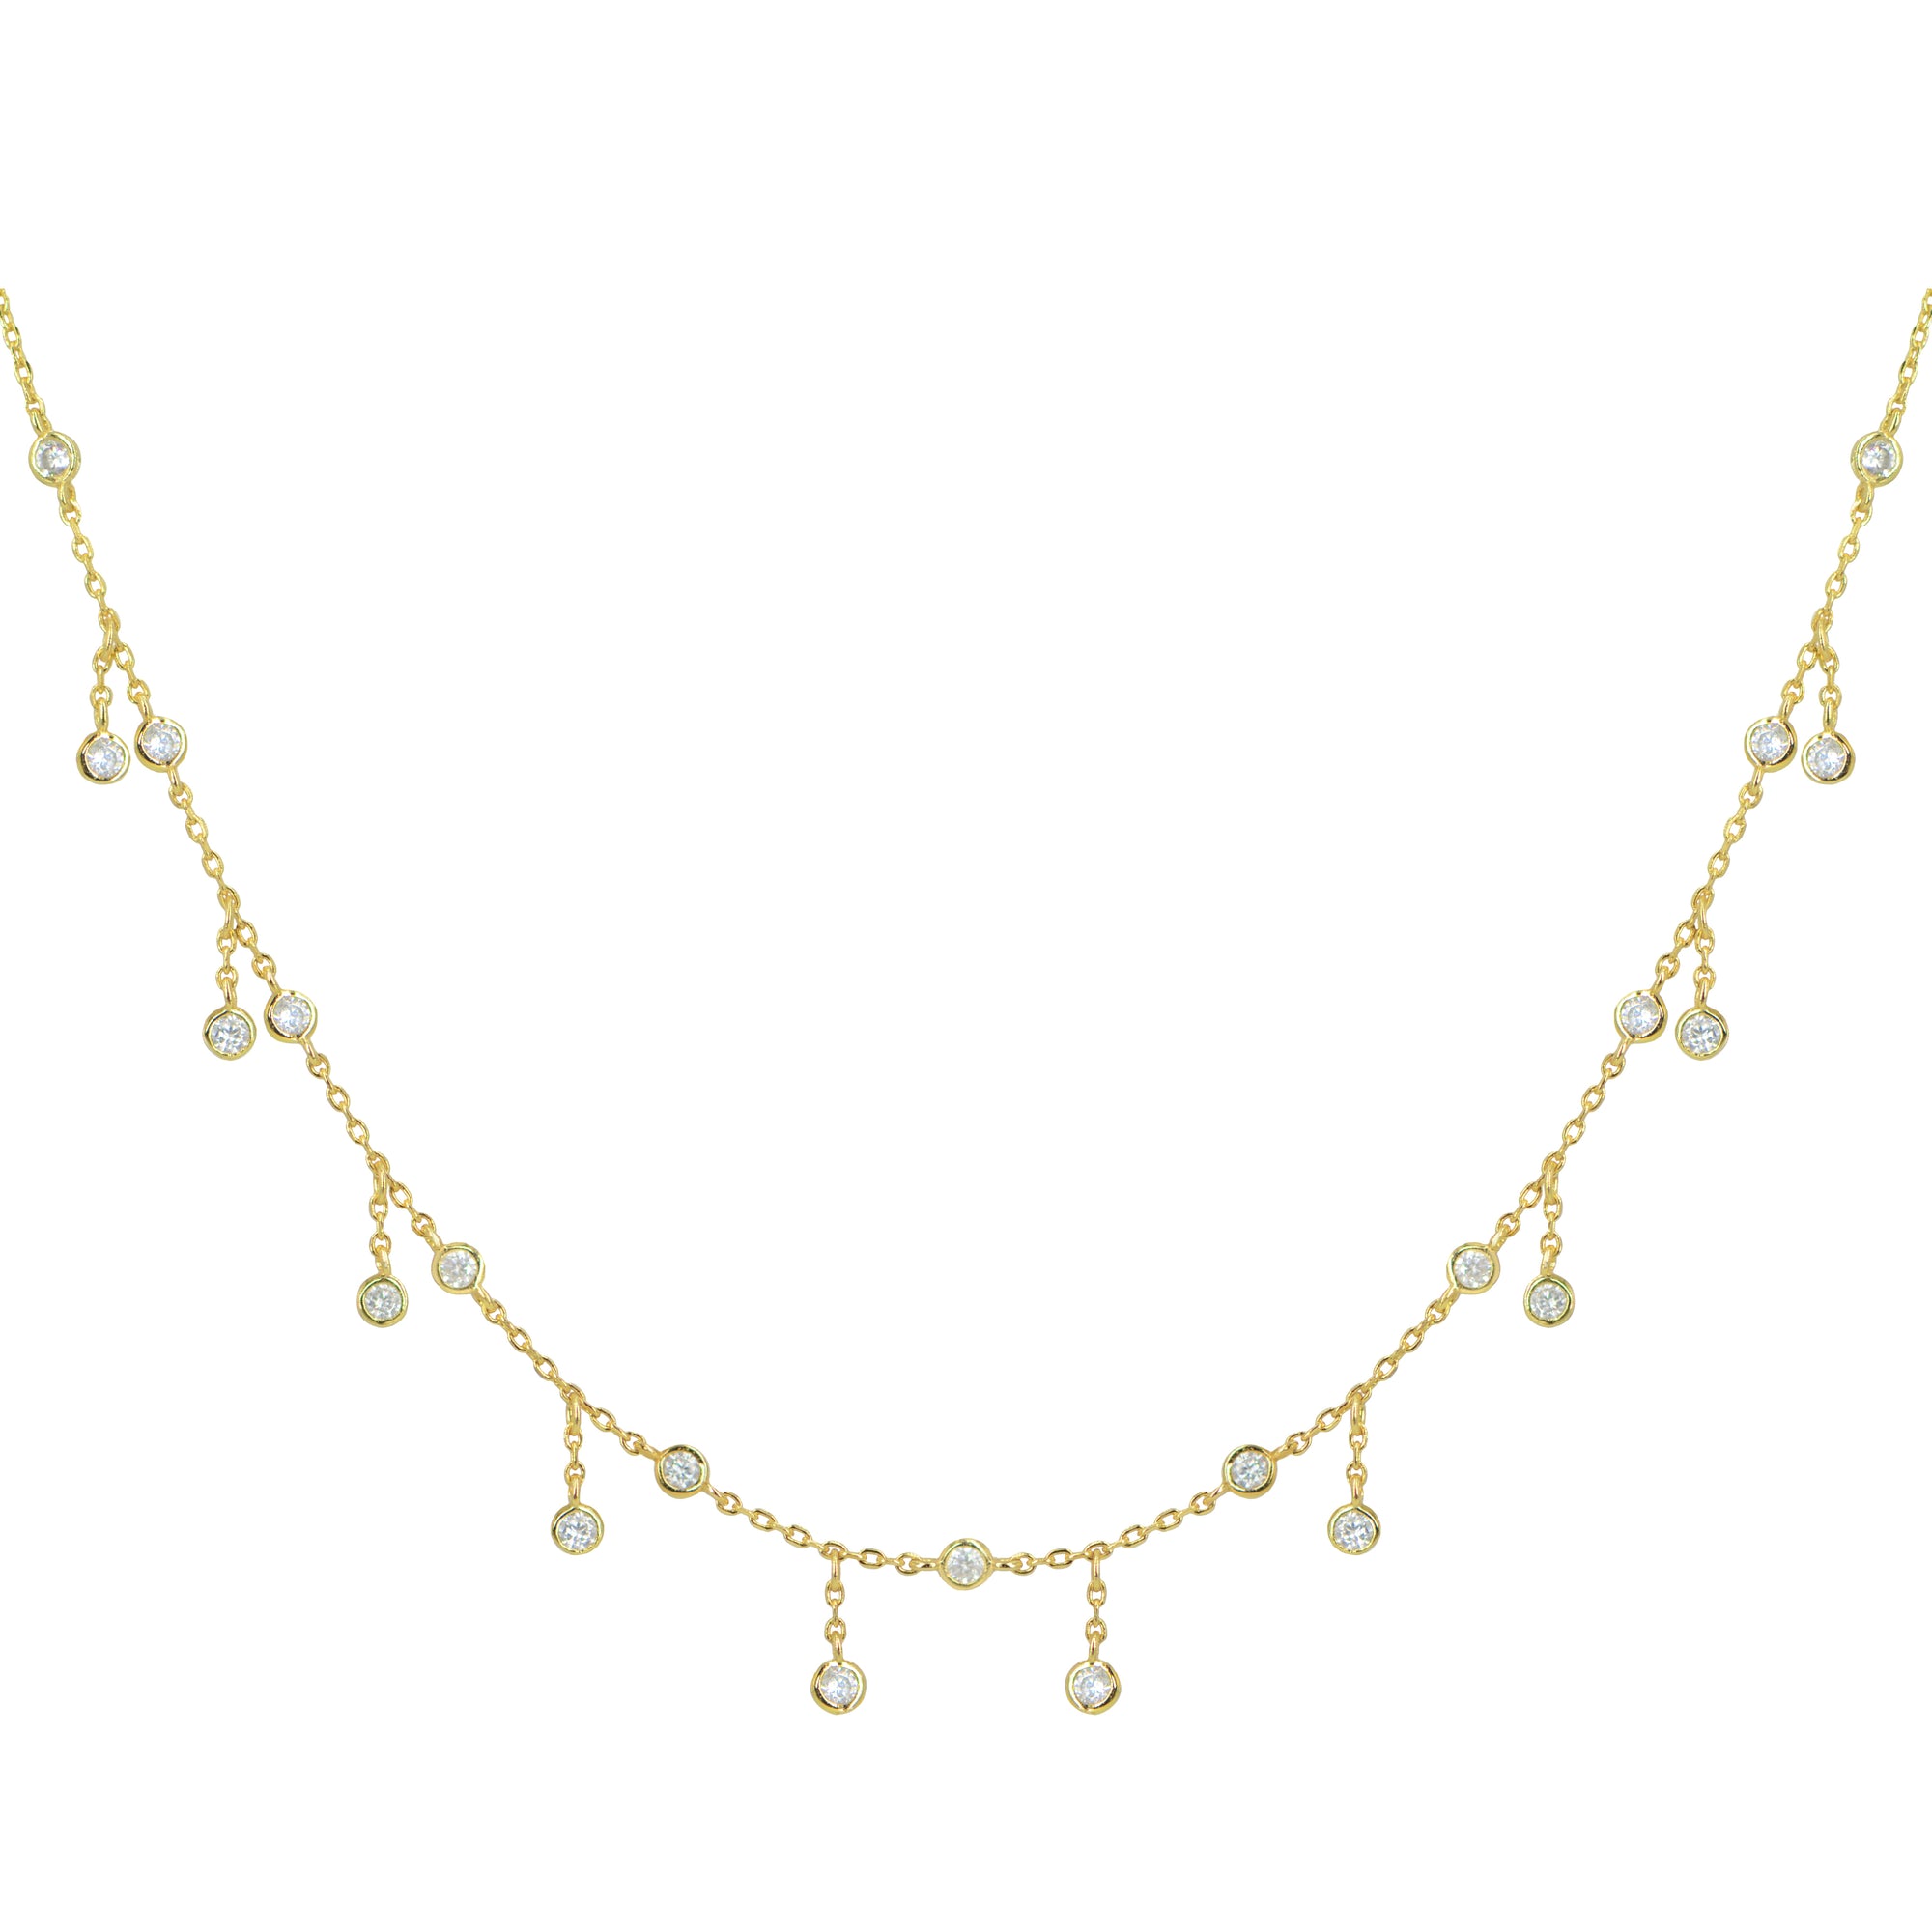 Rain Drop Choker Necklace With Crystals Gold